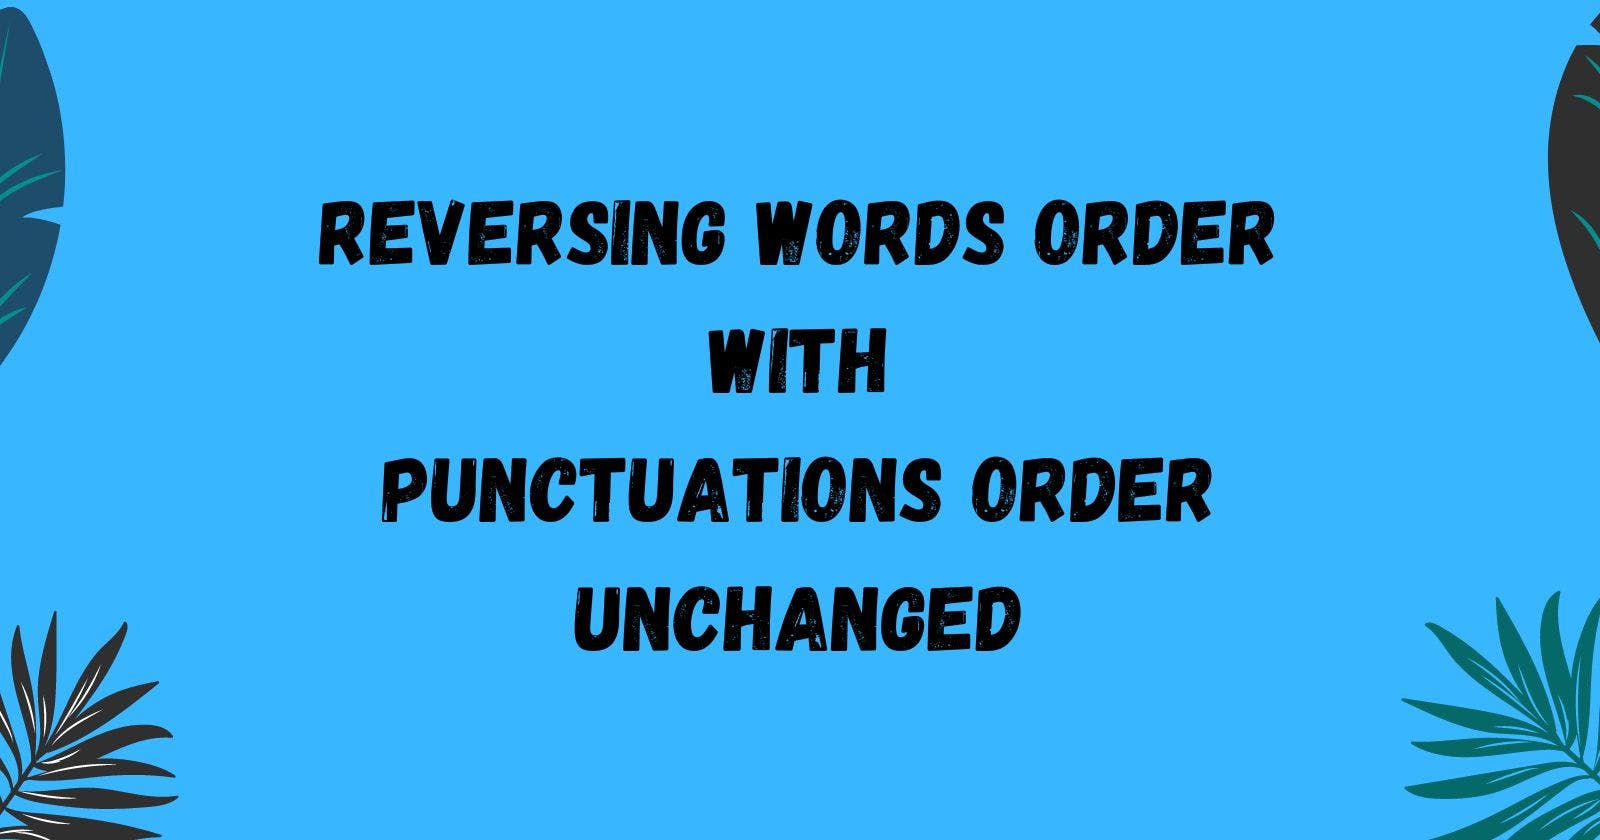 Reversing Words Order with Punctuations Order Unchanged